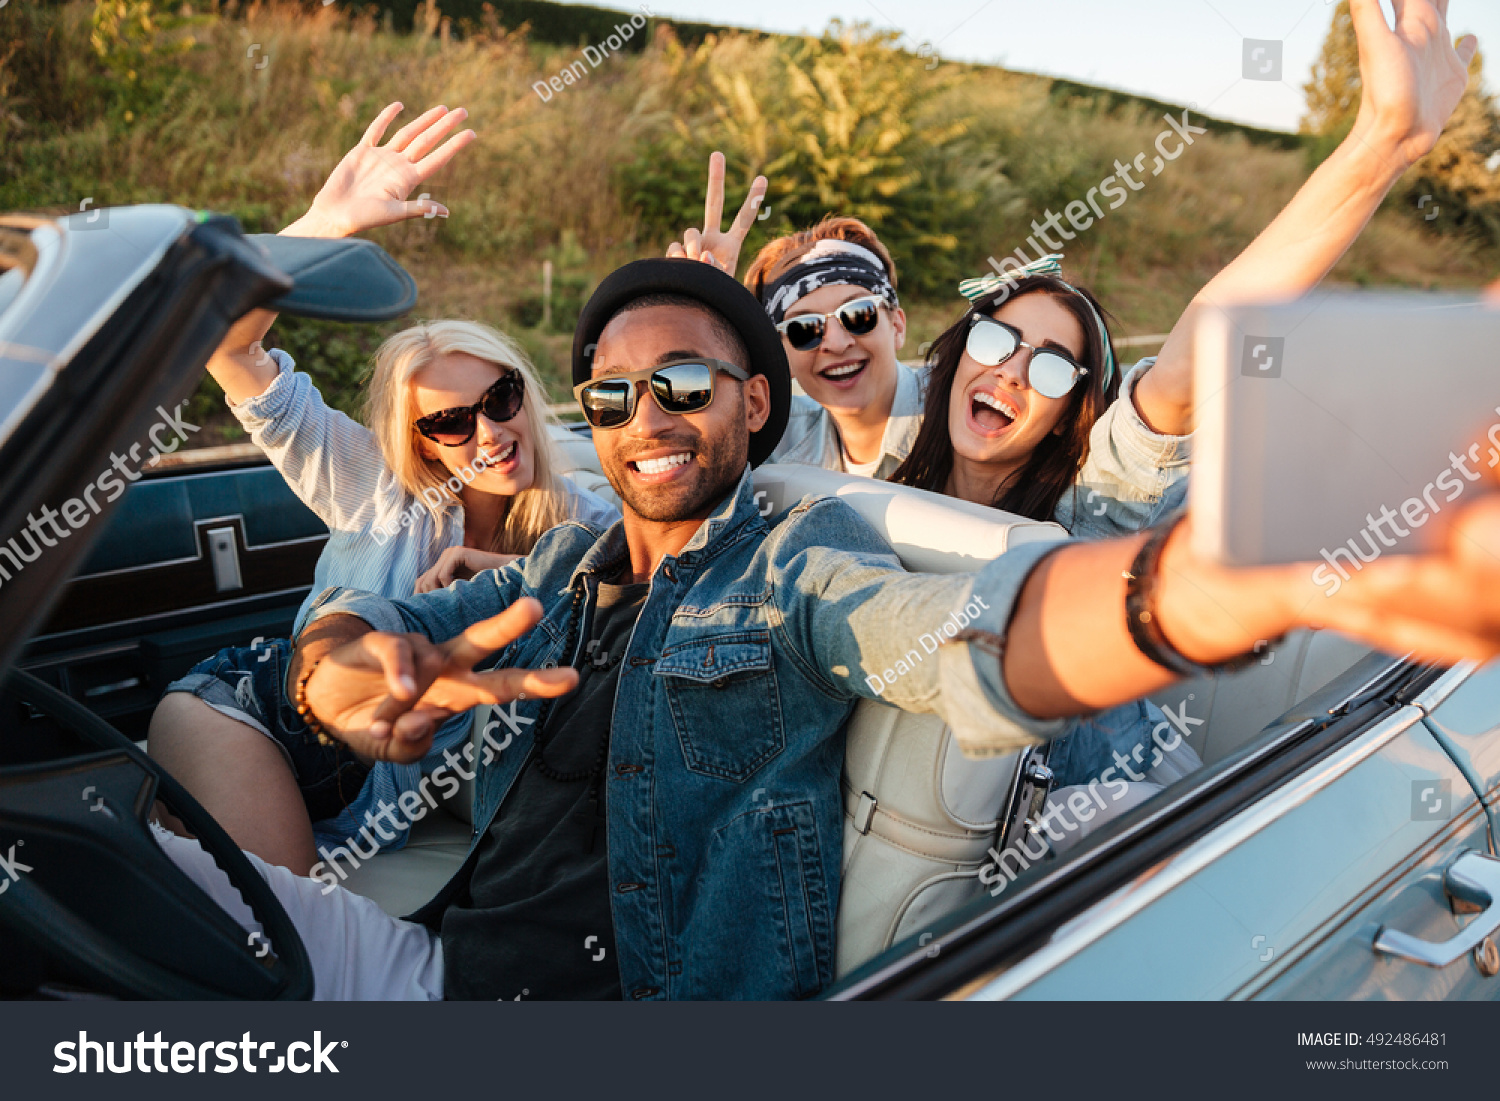 Multiethnic group of happy young people taking selfie with smartphone and showing peace sign in the car #492486481